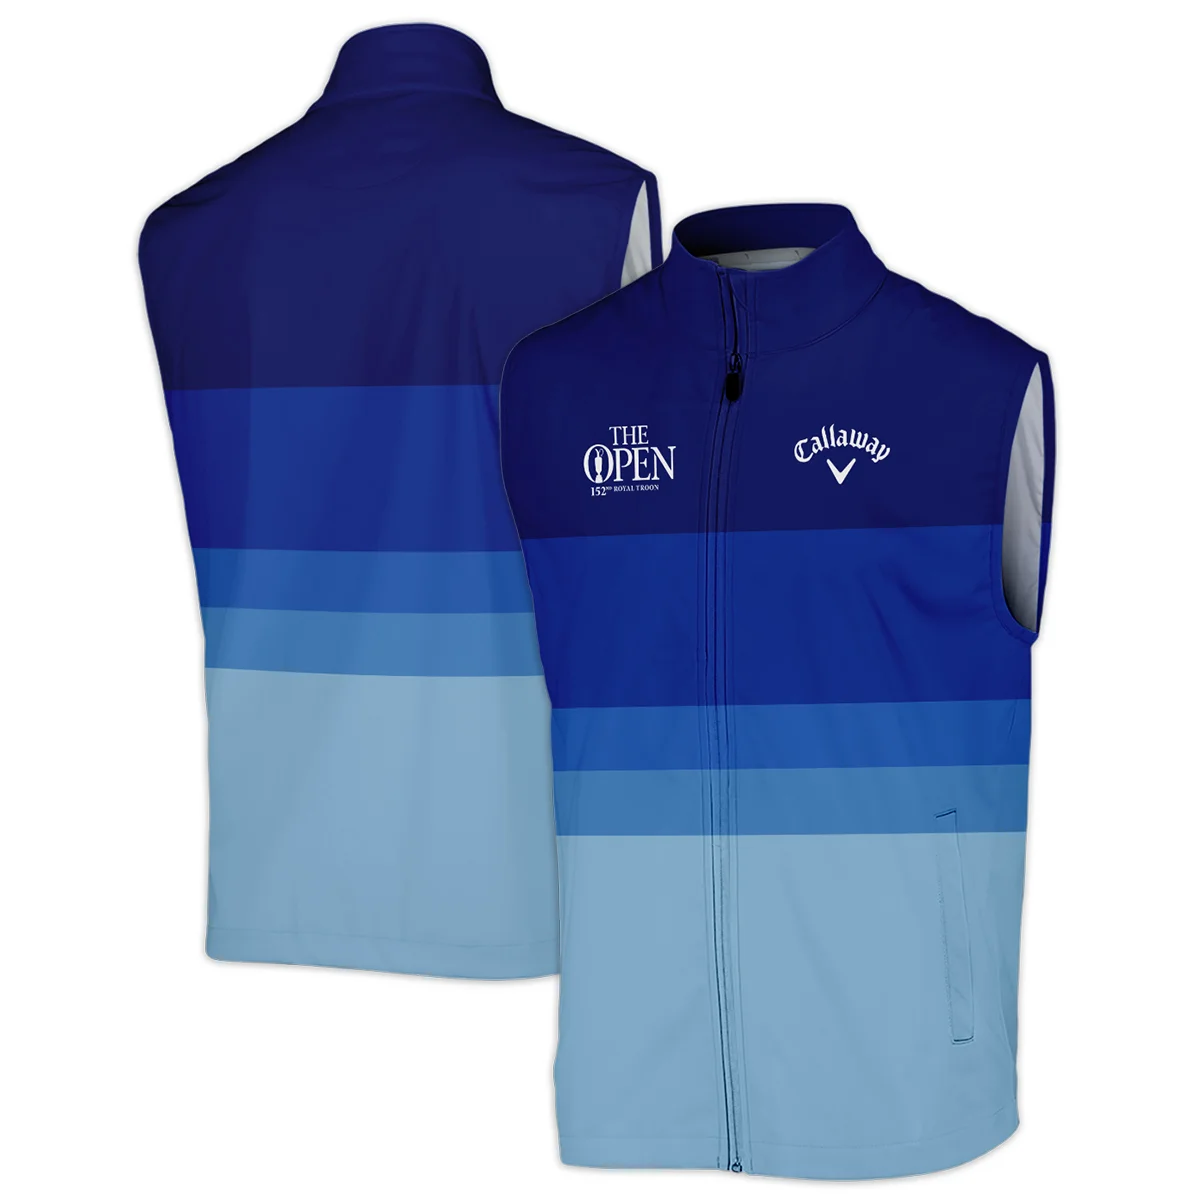 Blue Gradient Line Pattern Background Callaway 152nd Open Championship Sleeveless Jacket All Over Prints HOTOP270624A04CLWSJK